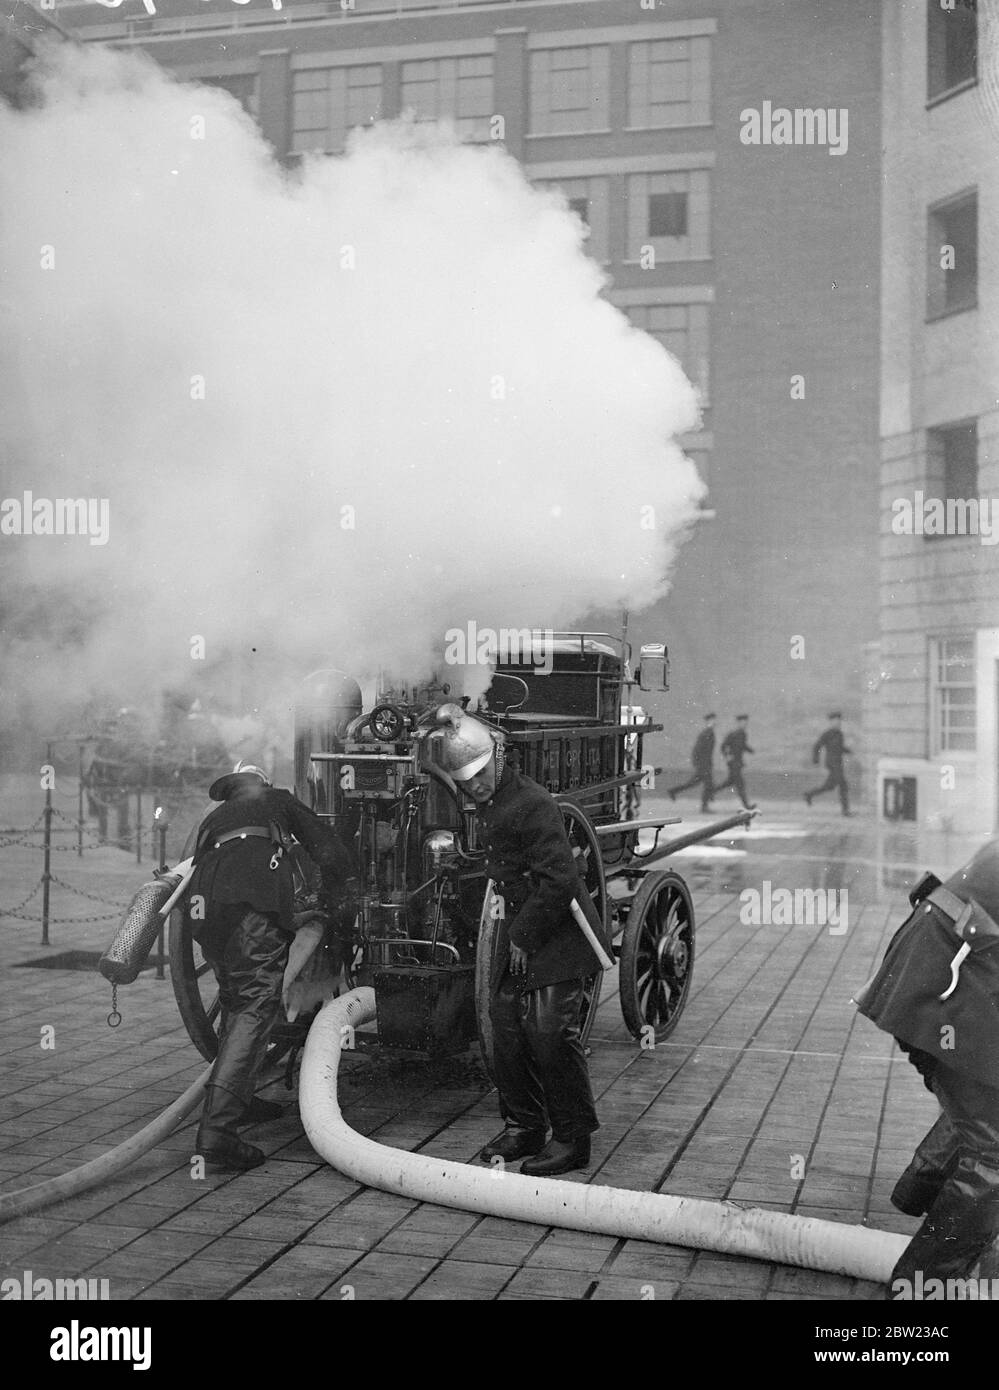 Old and new methods of firefighting demonstrated by the London Fire Brigade in a display stage before fire chief from all parts of England at the brigade headquarters in London. Fire appliances of past centuries and the most up-to-date equipment were used for the display. Firemen was an old horse engine fighting a fire during the display. 13 October 1937. Stock Photo